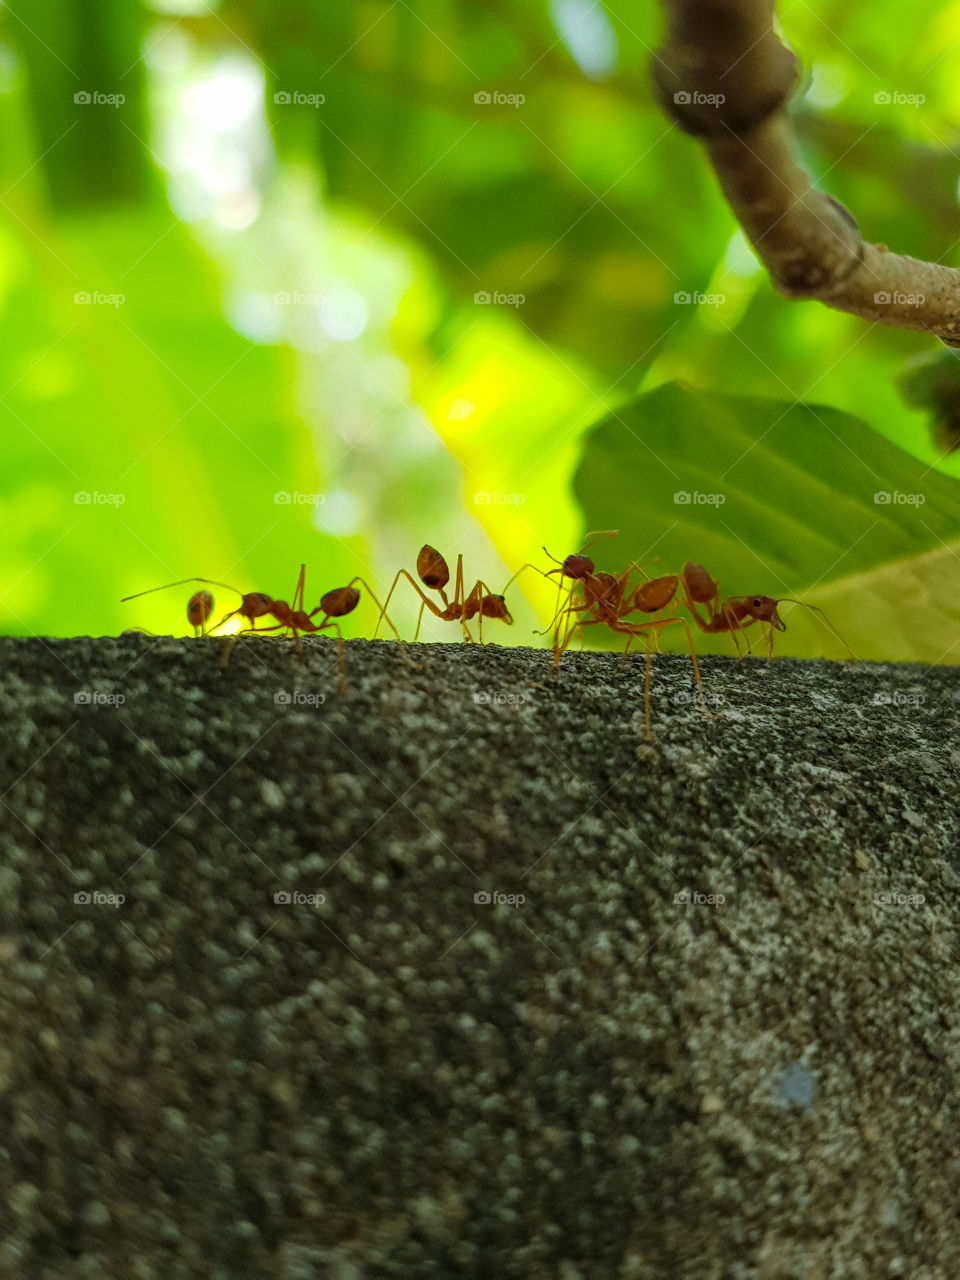 Morning life cycle of ants.